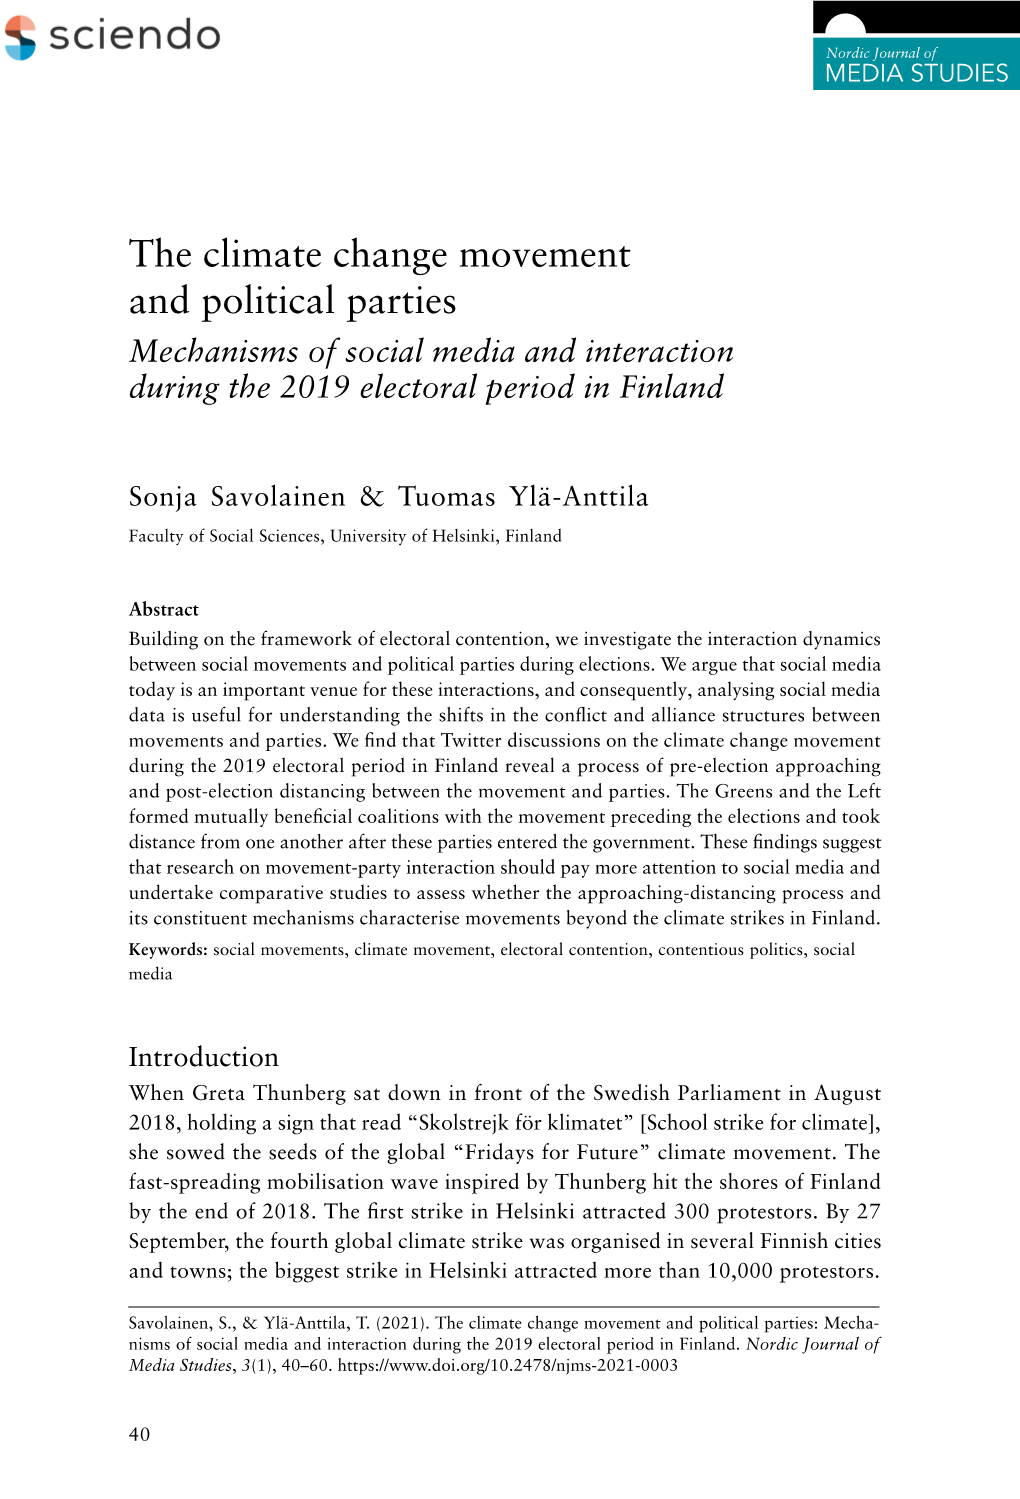 The Climate Change Movement and Political Parties Mechanisms of Social Media and Interaction During the 2019 Electoral Period in Finland